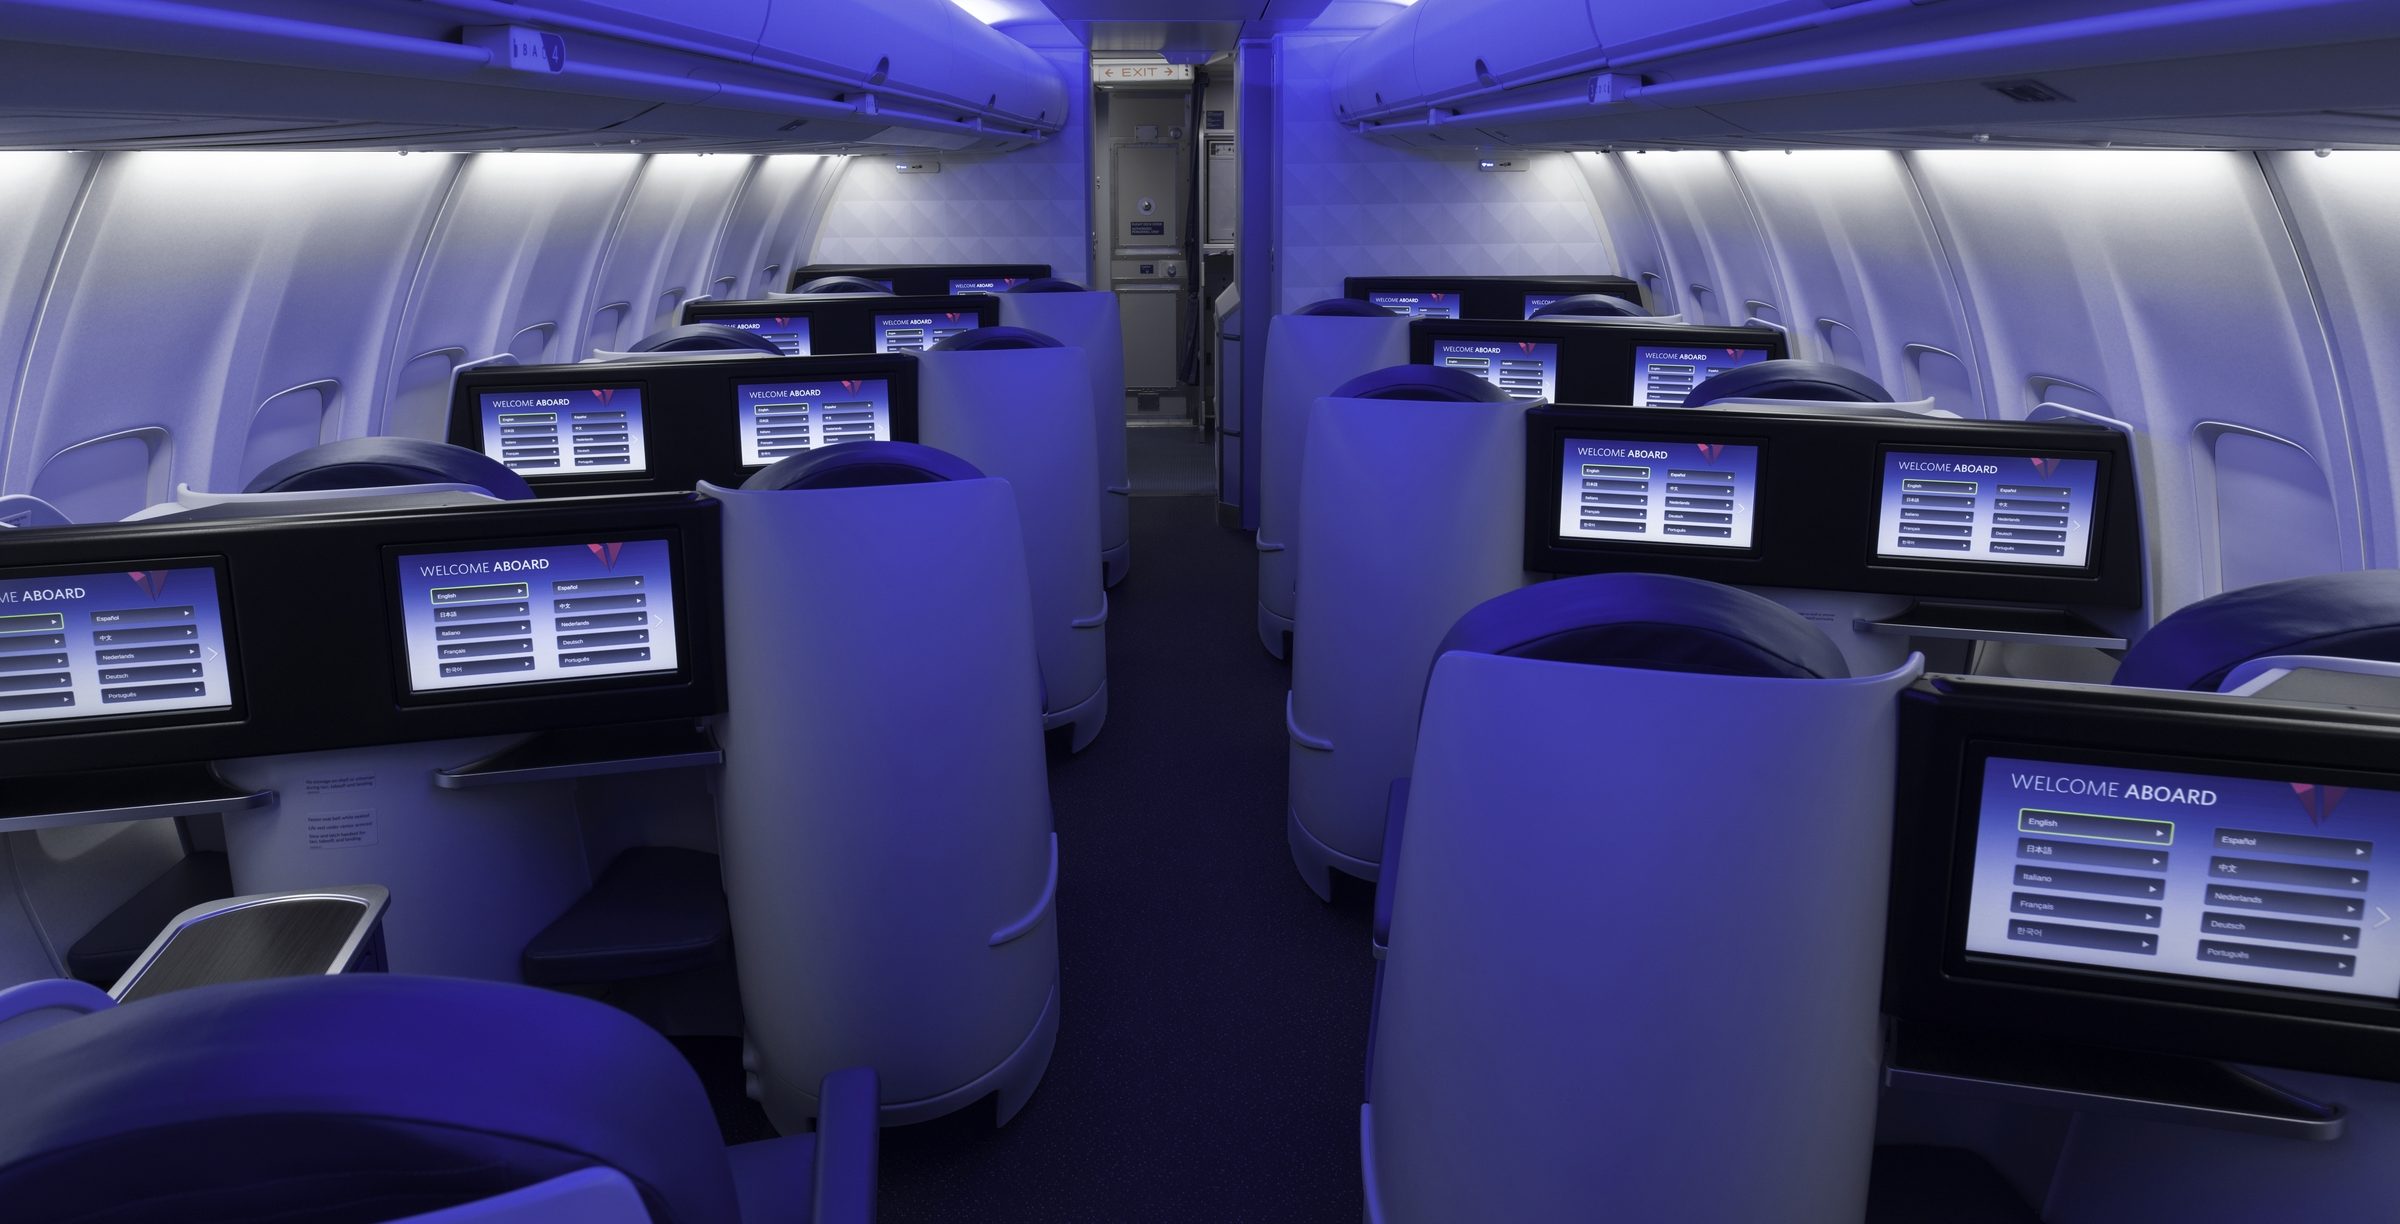                      Flight Review: Delta (Boeing 757) First Class From Seattle to New York (Red-Eye Flight)                             
                     